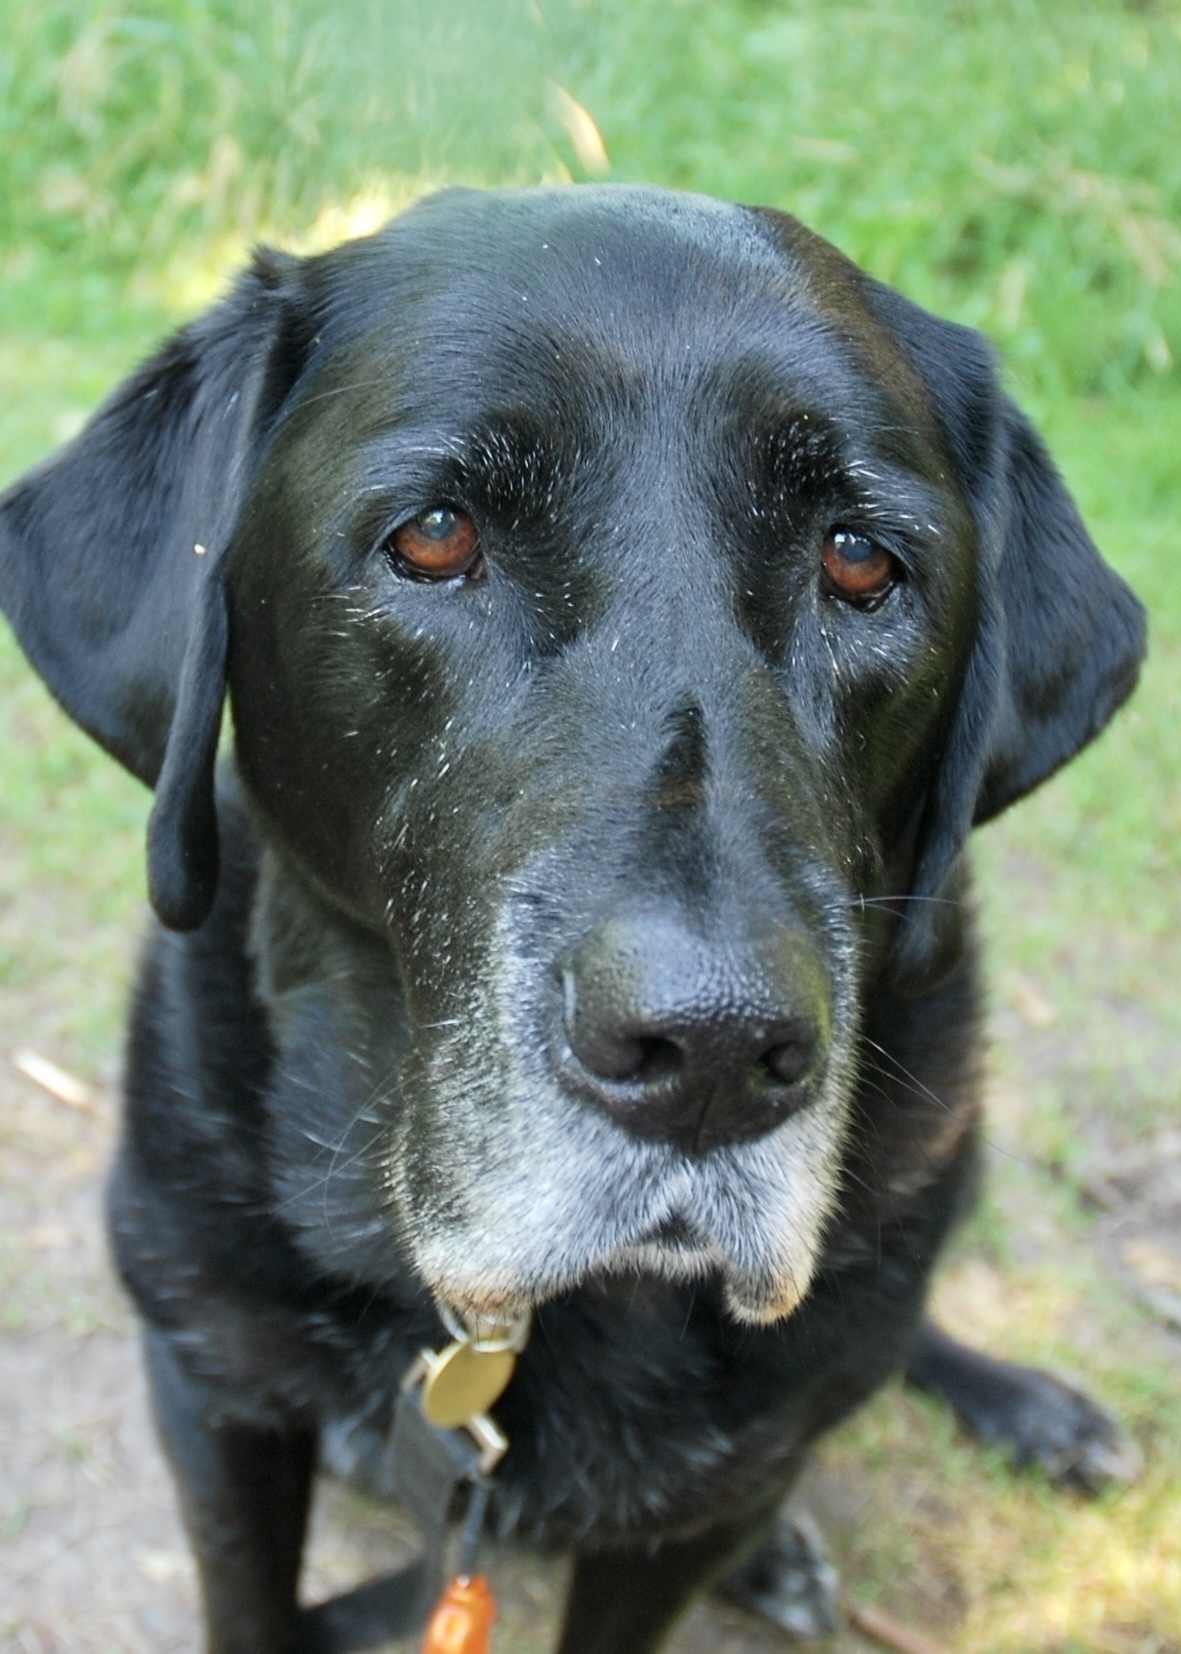 Our black lab, Ceiligh, later in life